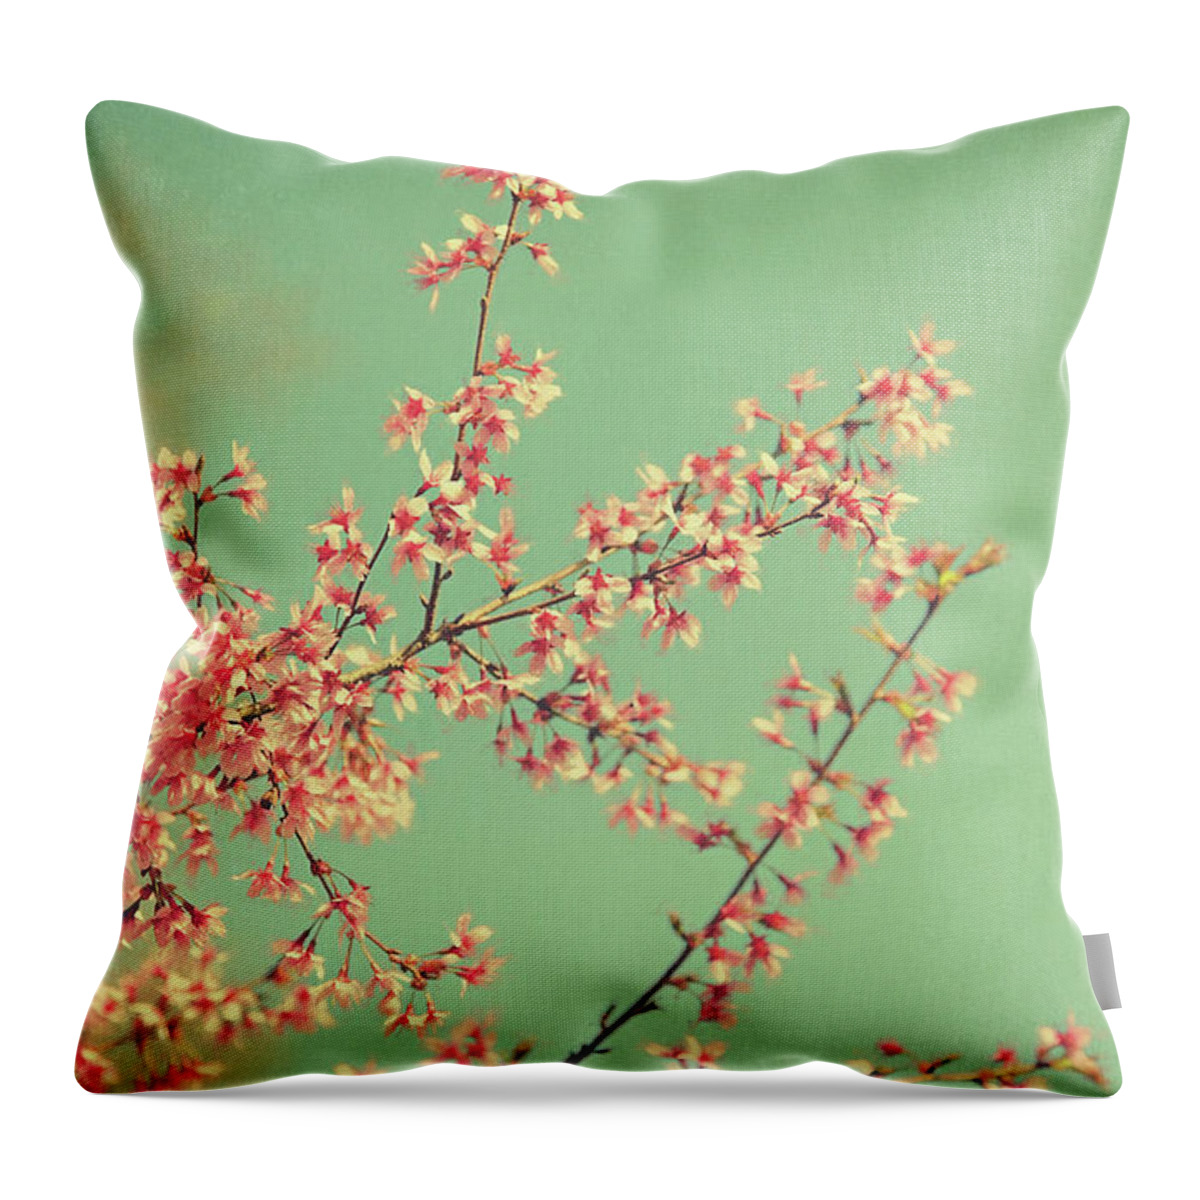 Spring Throw Pillow featuring the photograph Cherry Blossoms by Carrie Ann Grippo-Pike